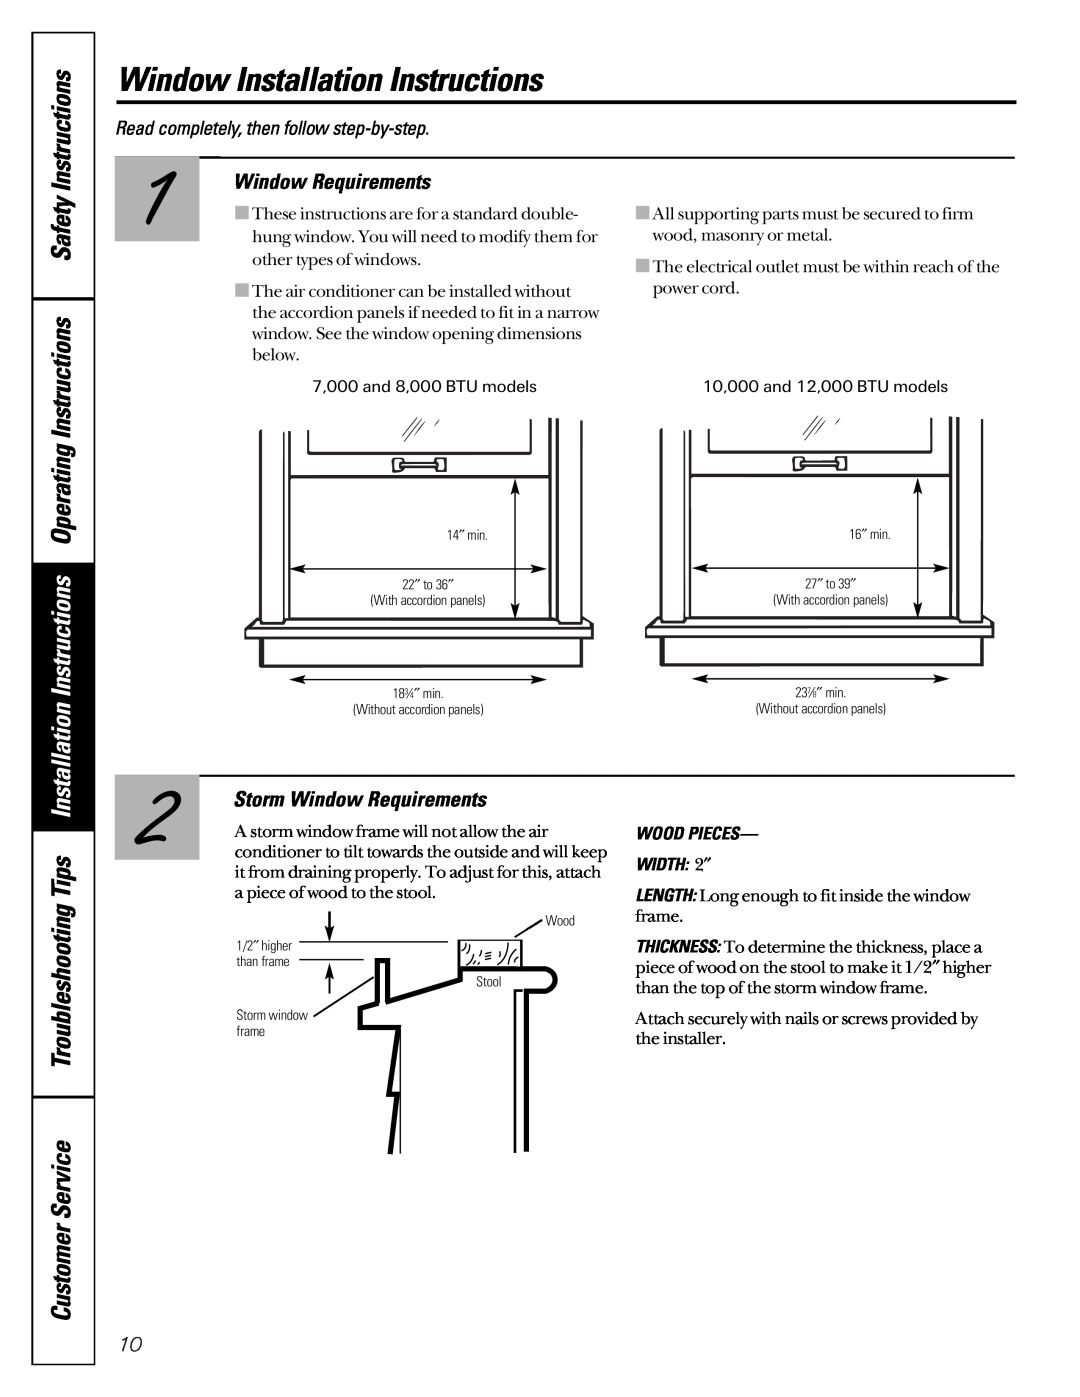 GE AG_12  12 Storm Window Requirements, Window Installation Instructions, CustomerService, WOOD PIECES- WIDTH 2″ 